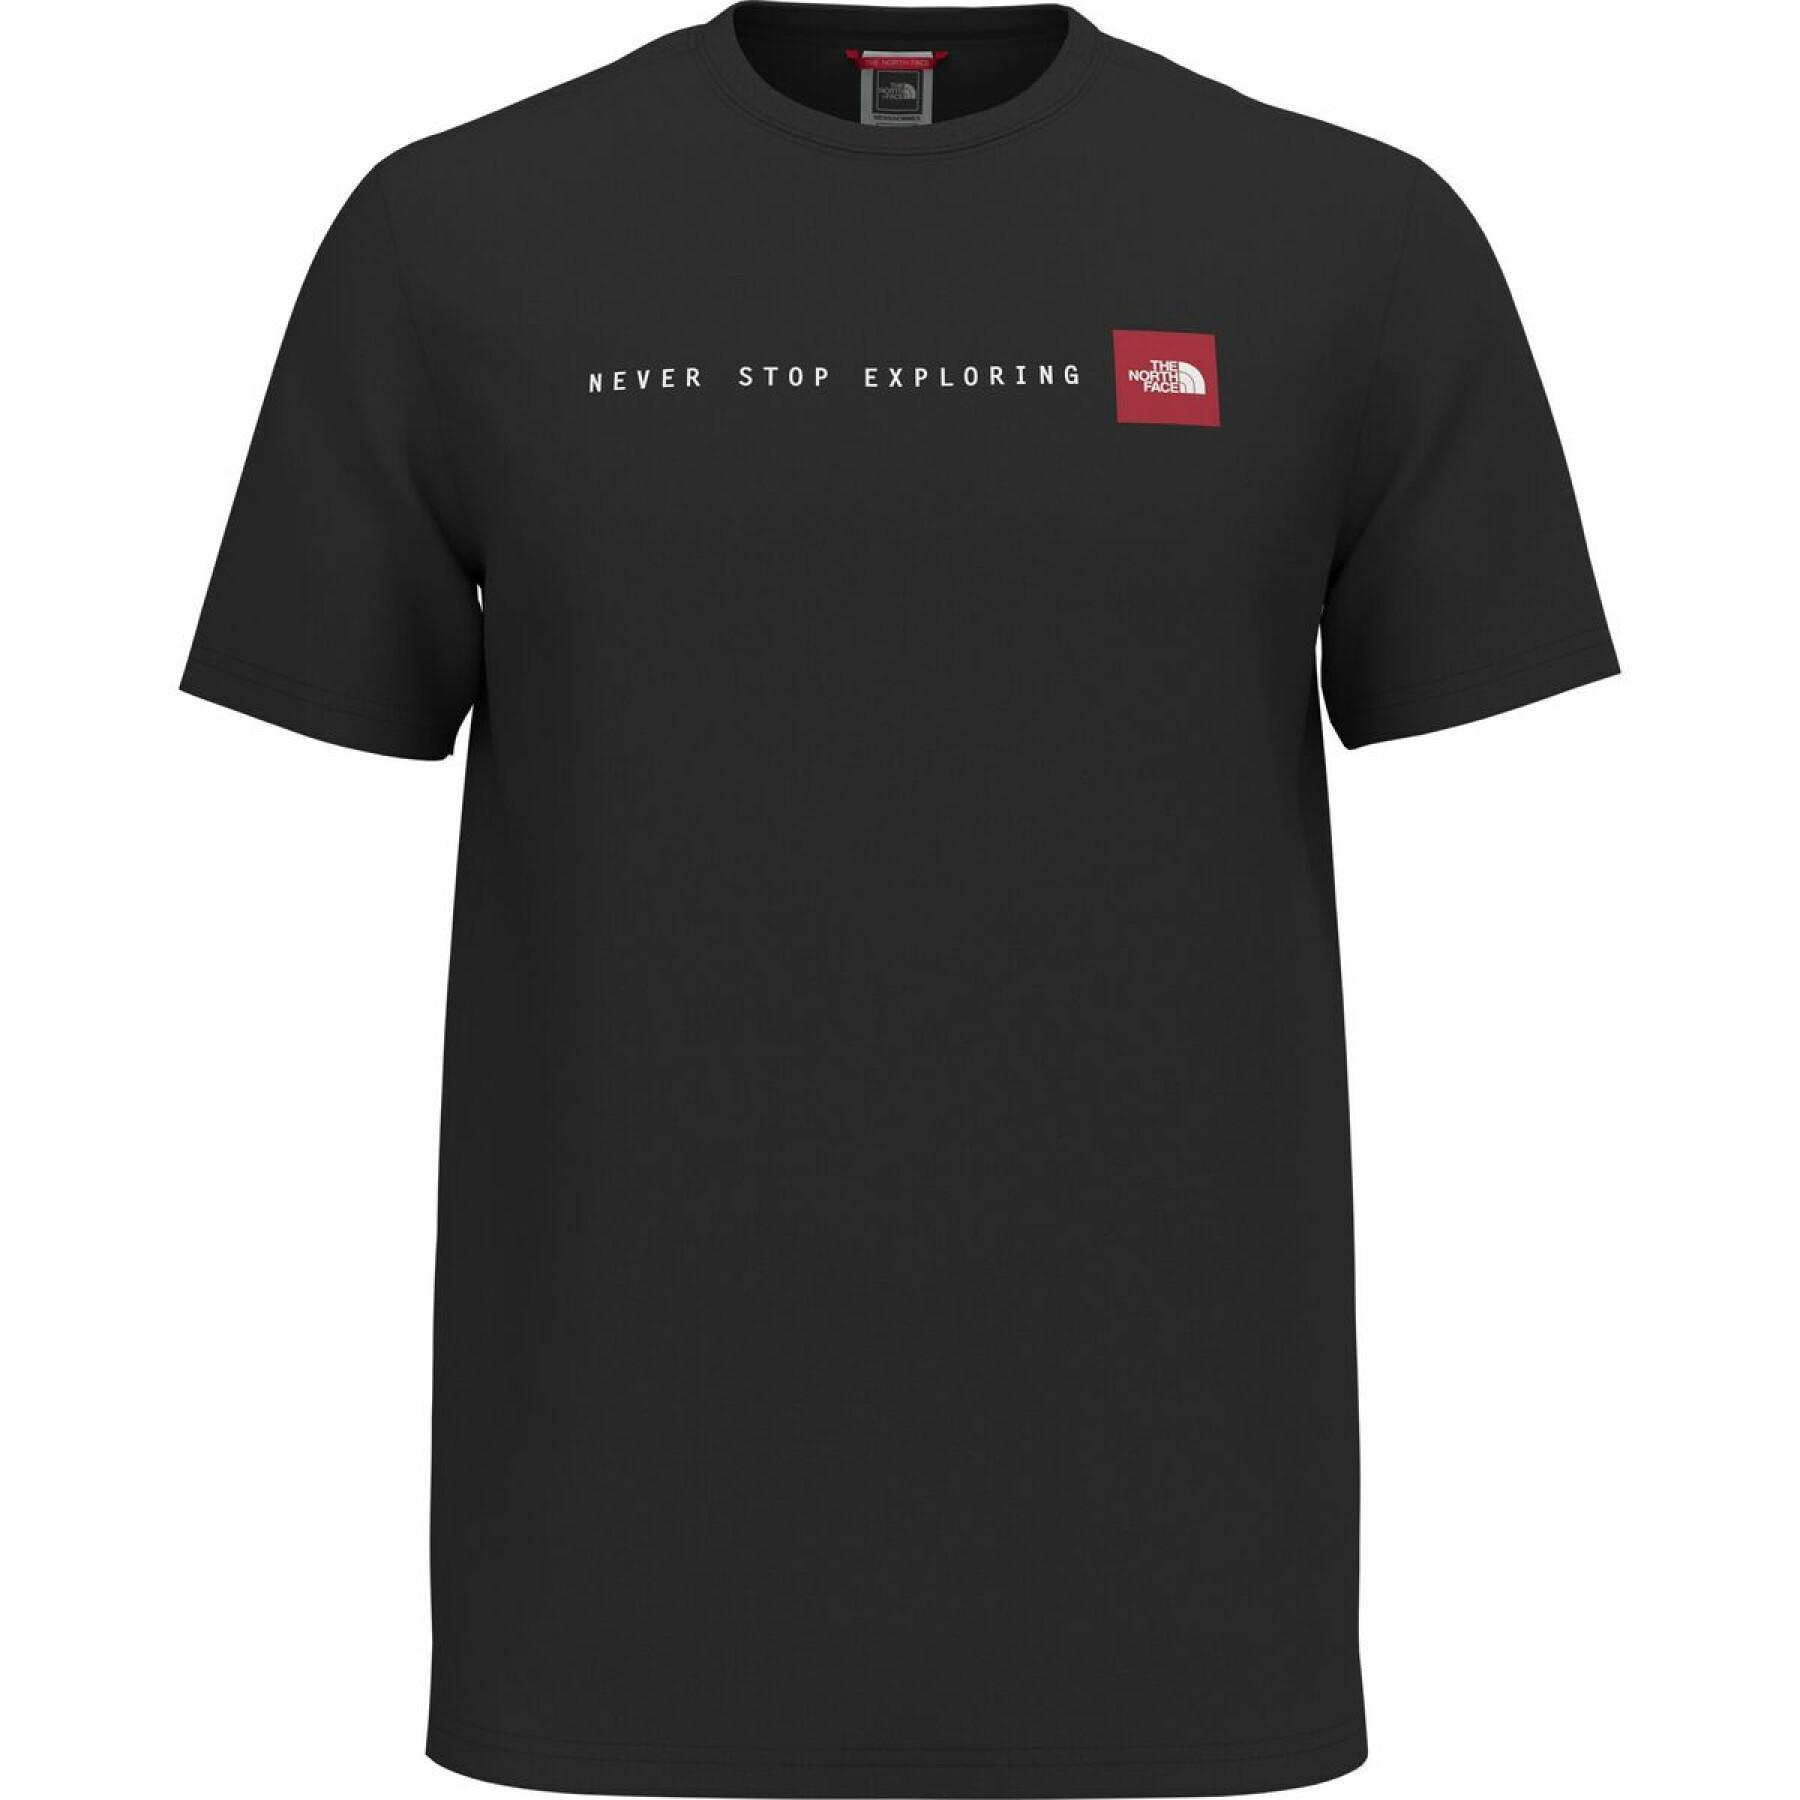 Klassisches T-Shirt The North Face "Never Stop Exploring"